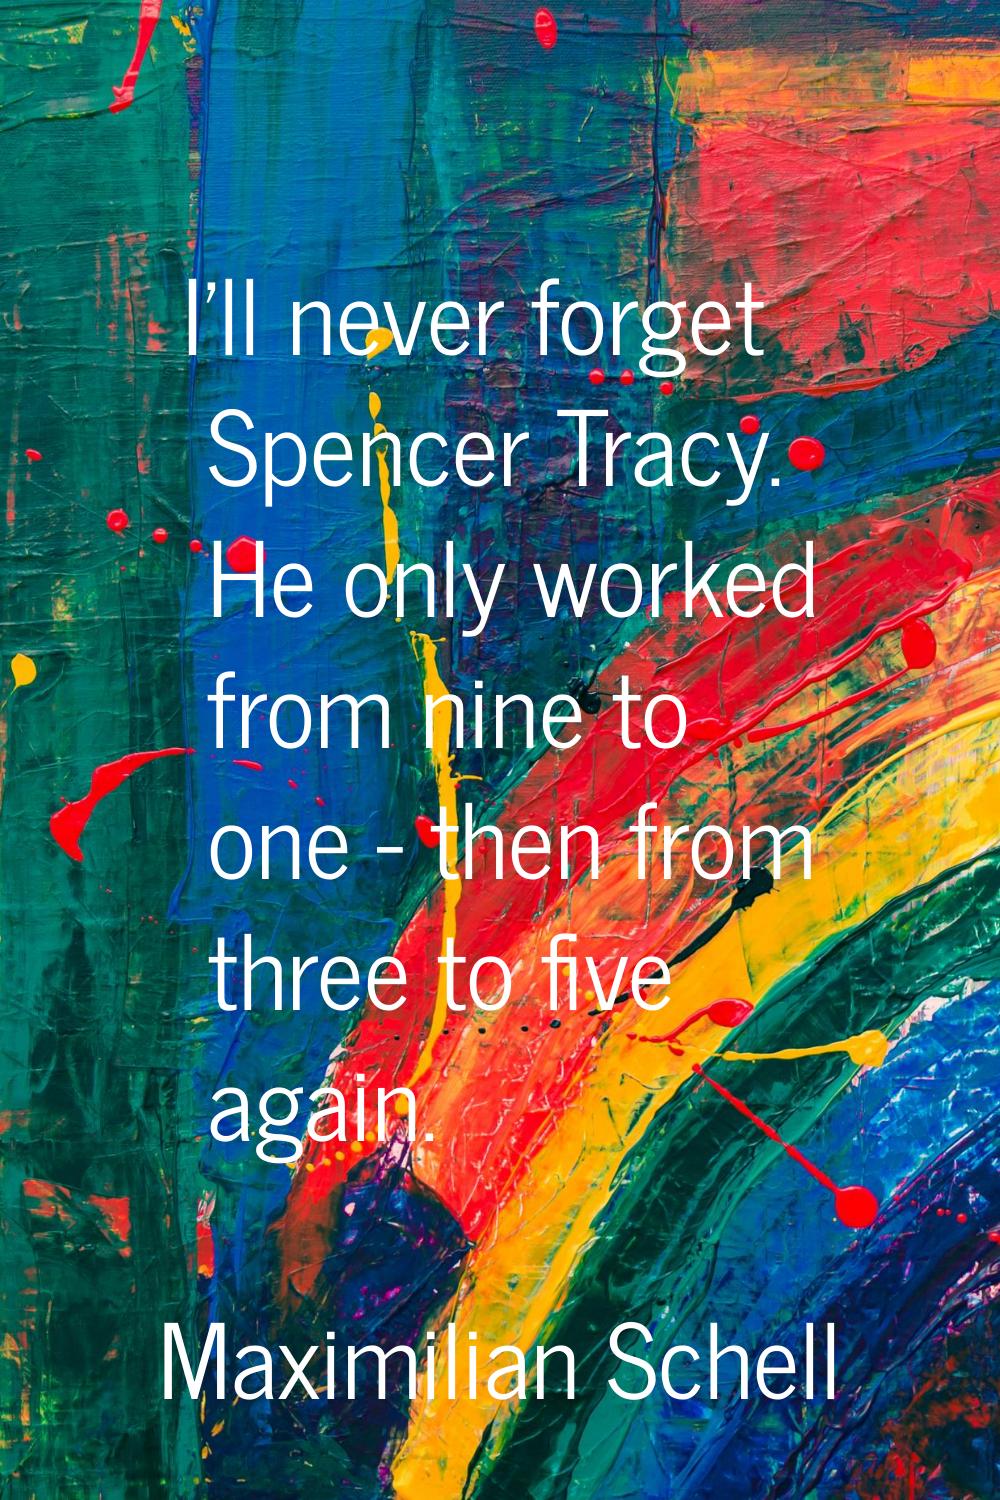 I'll never forget Spencer Tracy. He only worked from nine to one - then from three to five again.